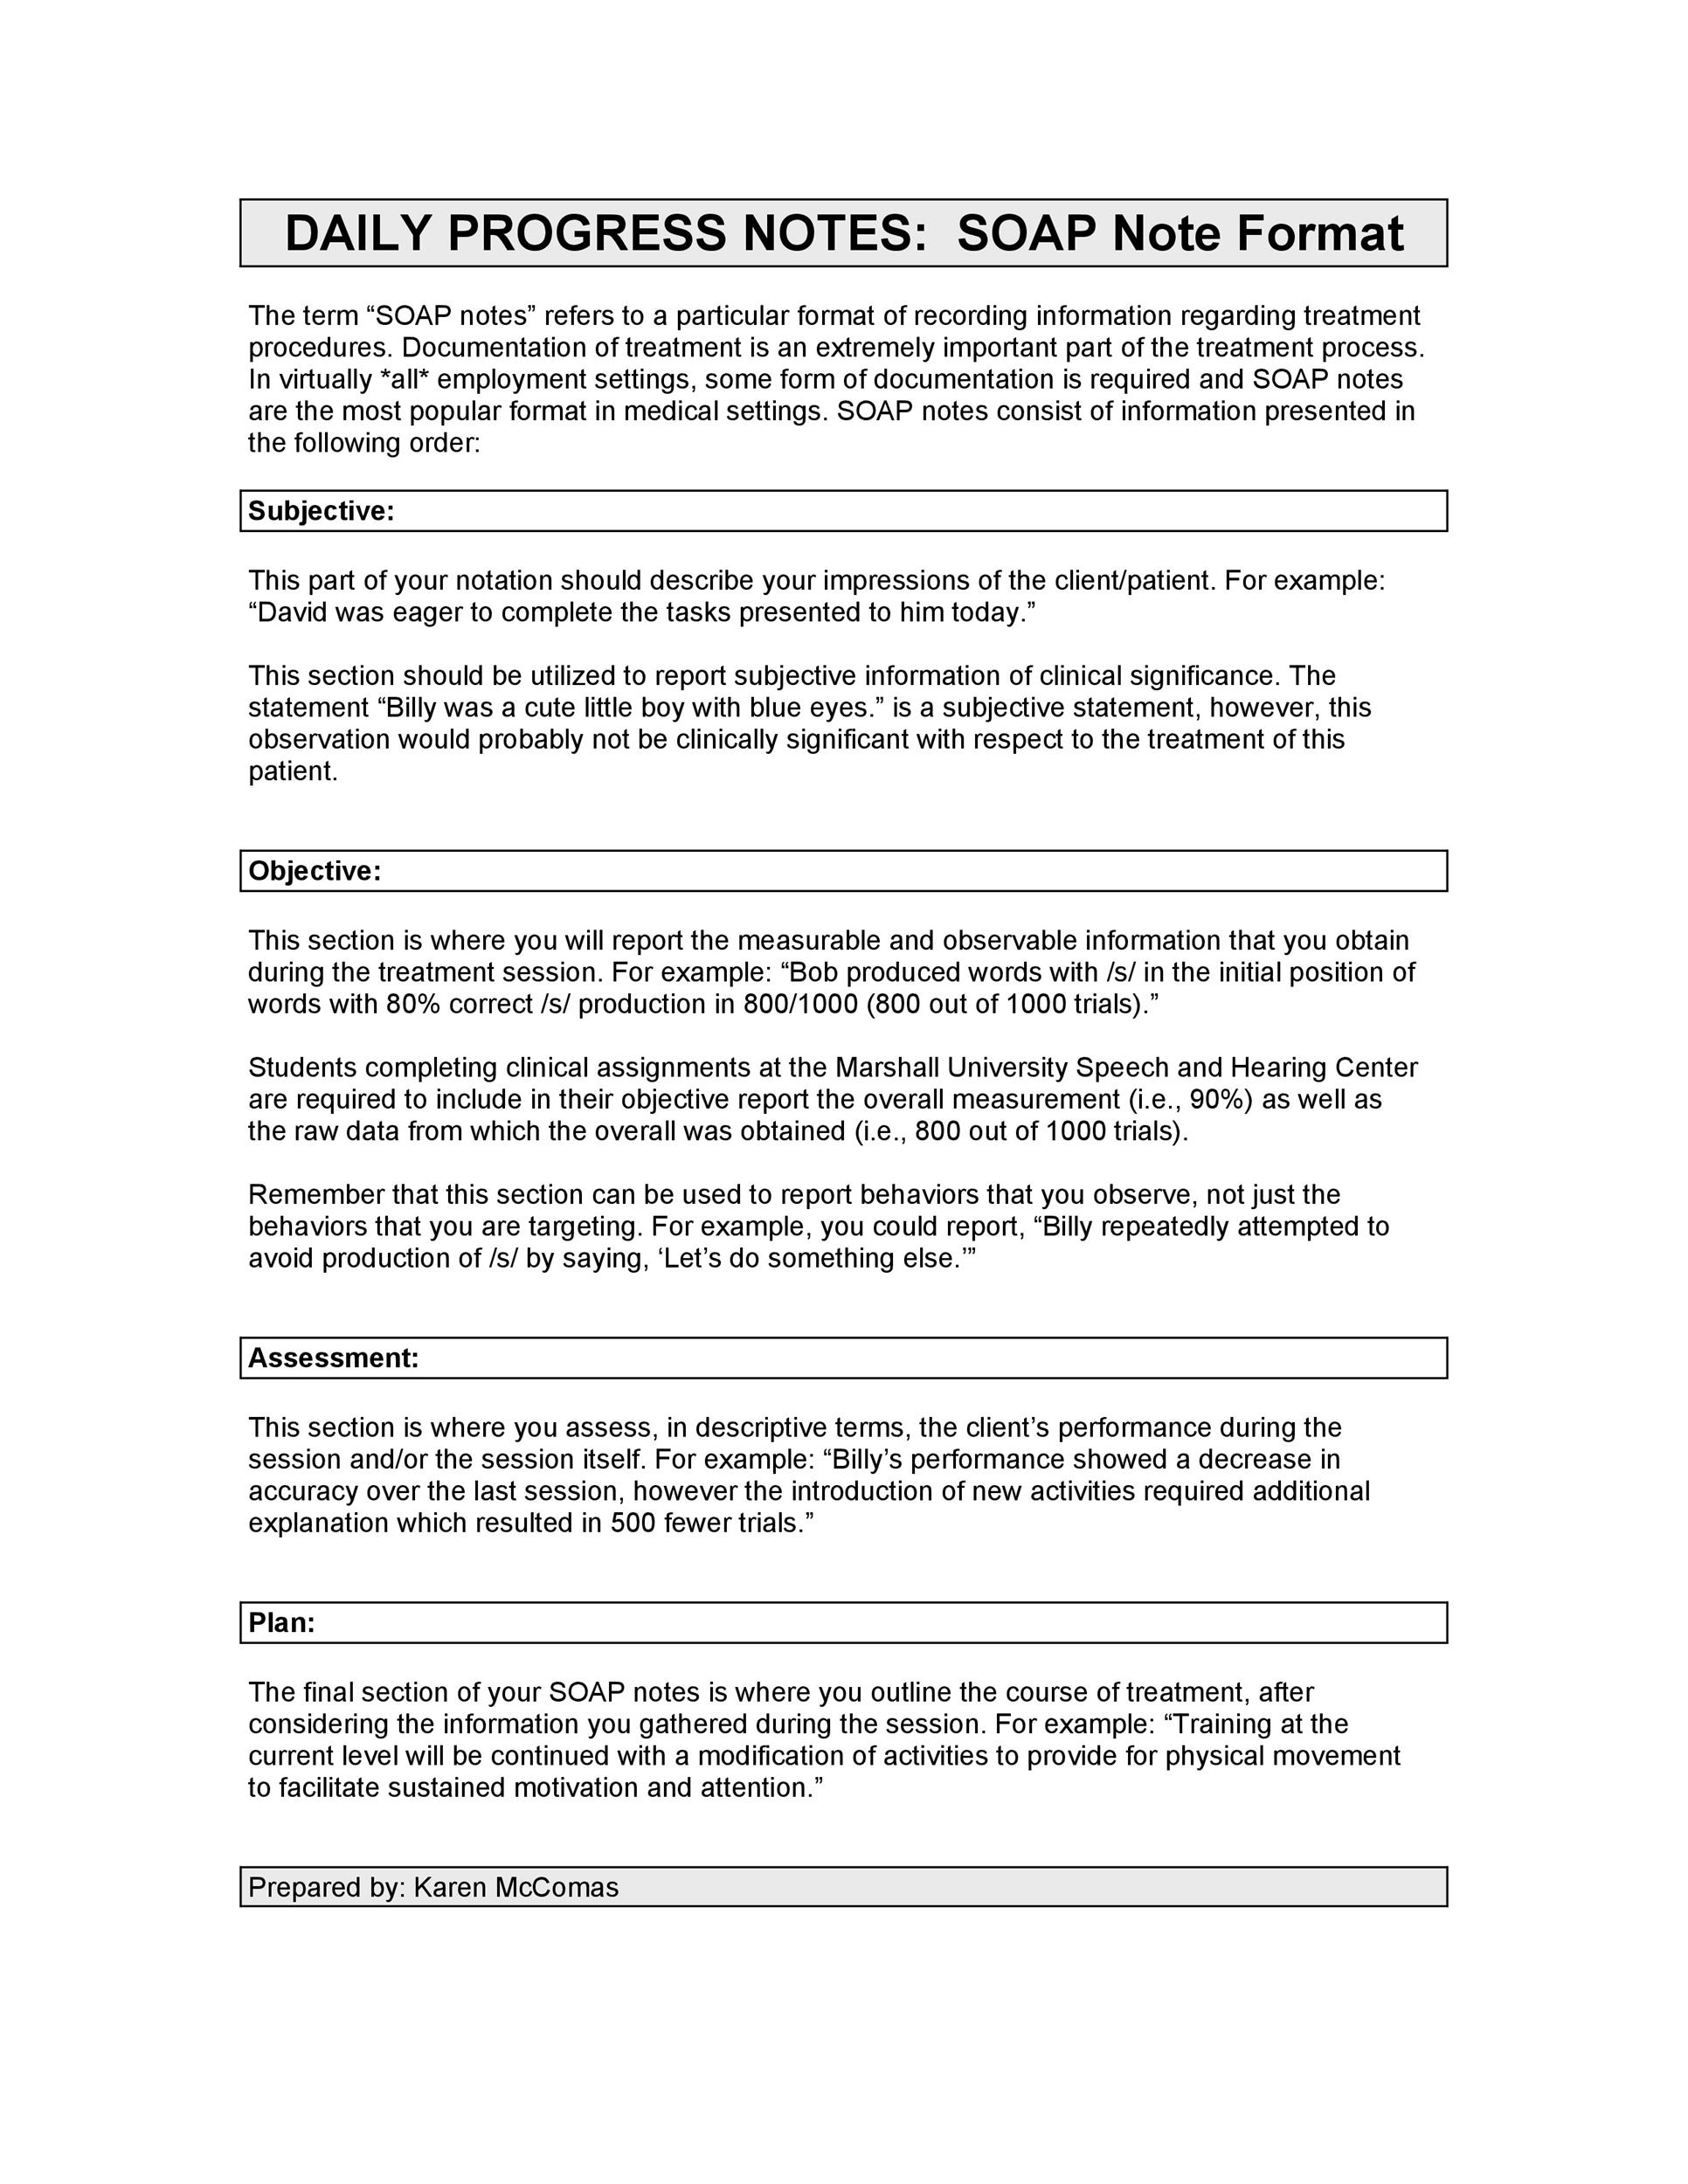 Free Soap Note Template 27